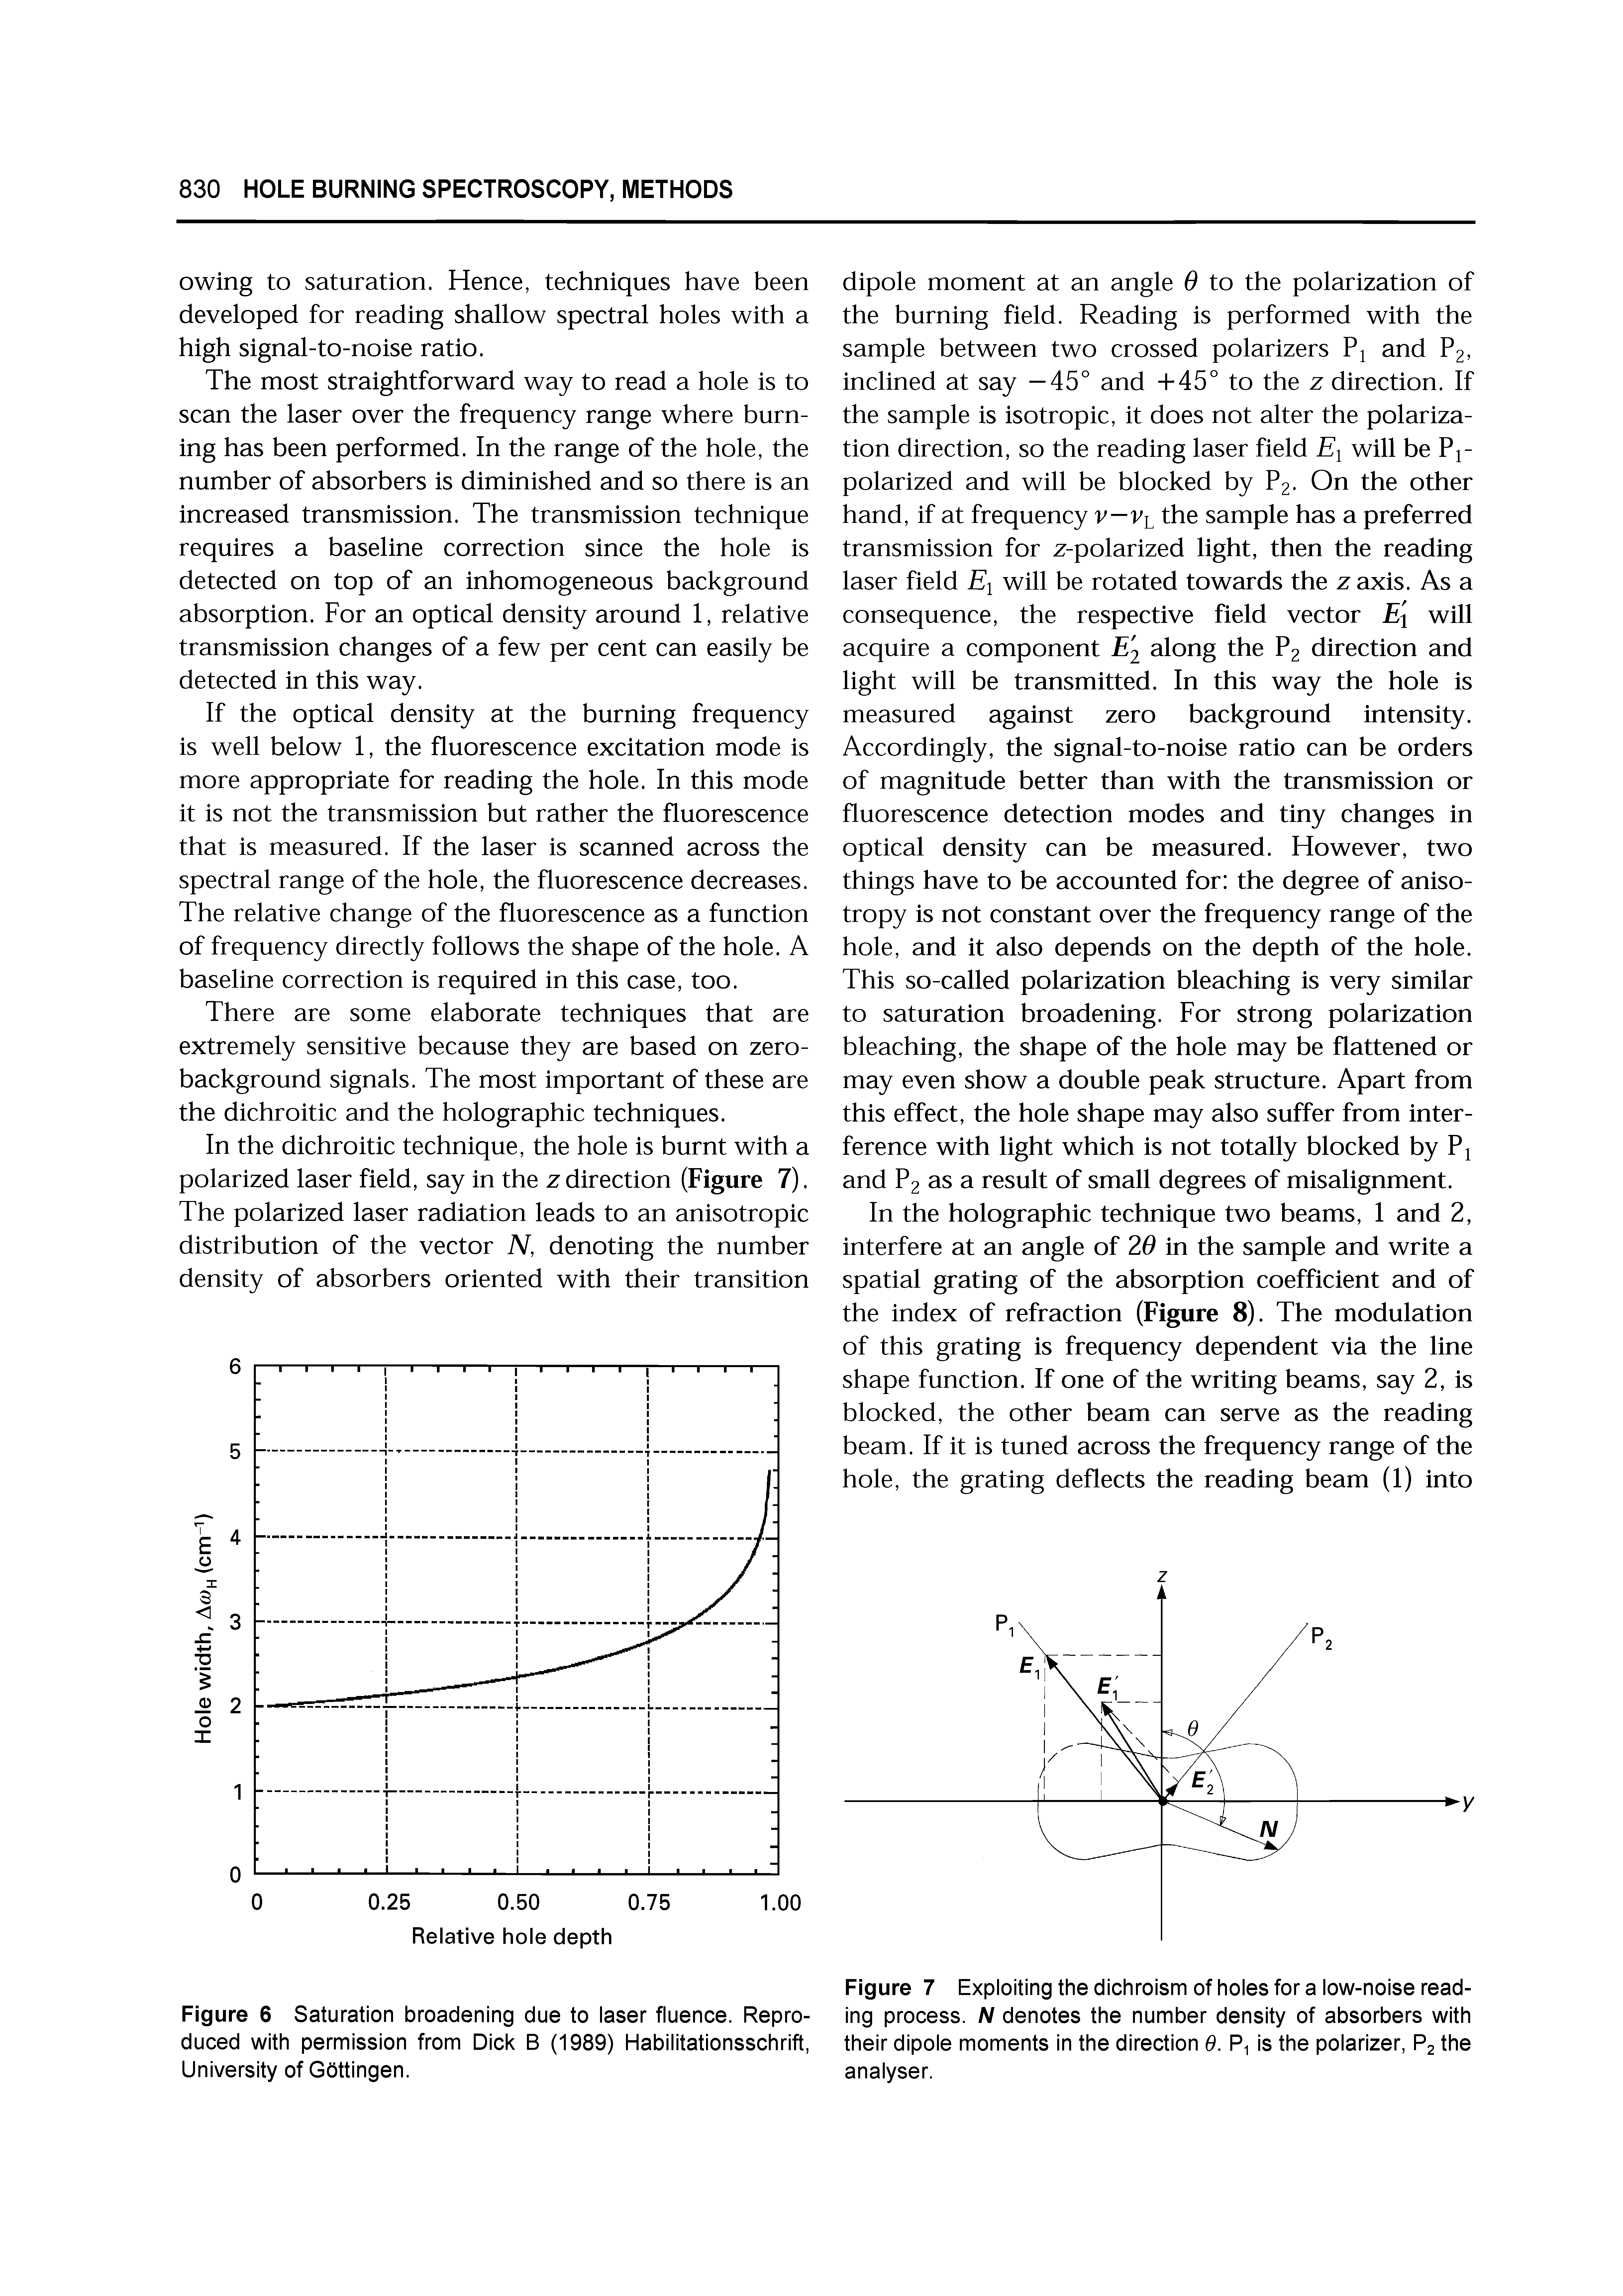 Figure 7 Exploiting the dichroism of holes for a low-noise reading process. N denotes the number density of absorbers with their dipole moments in the direction 0. is the polarizer, P2 the analyser.